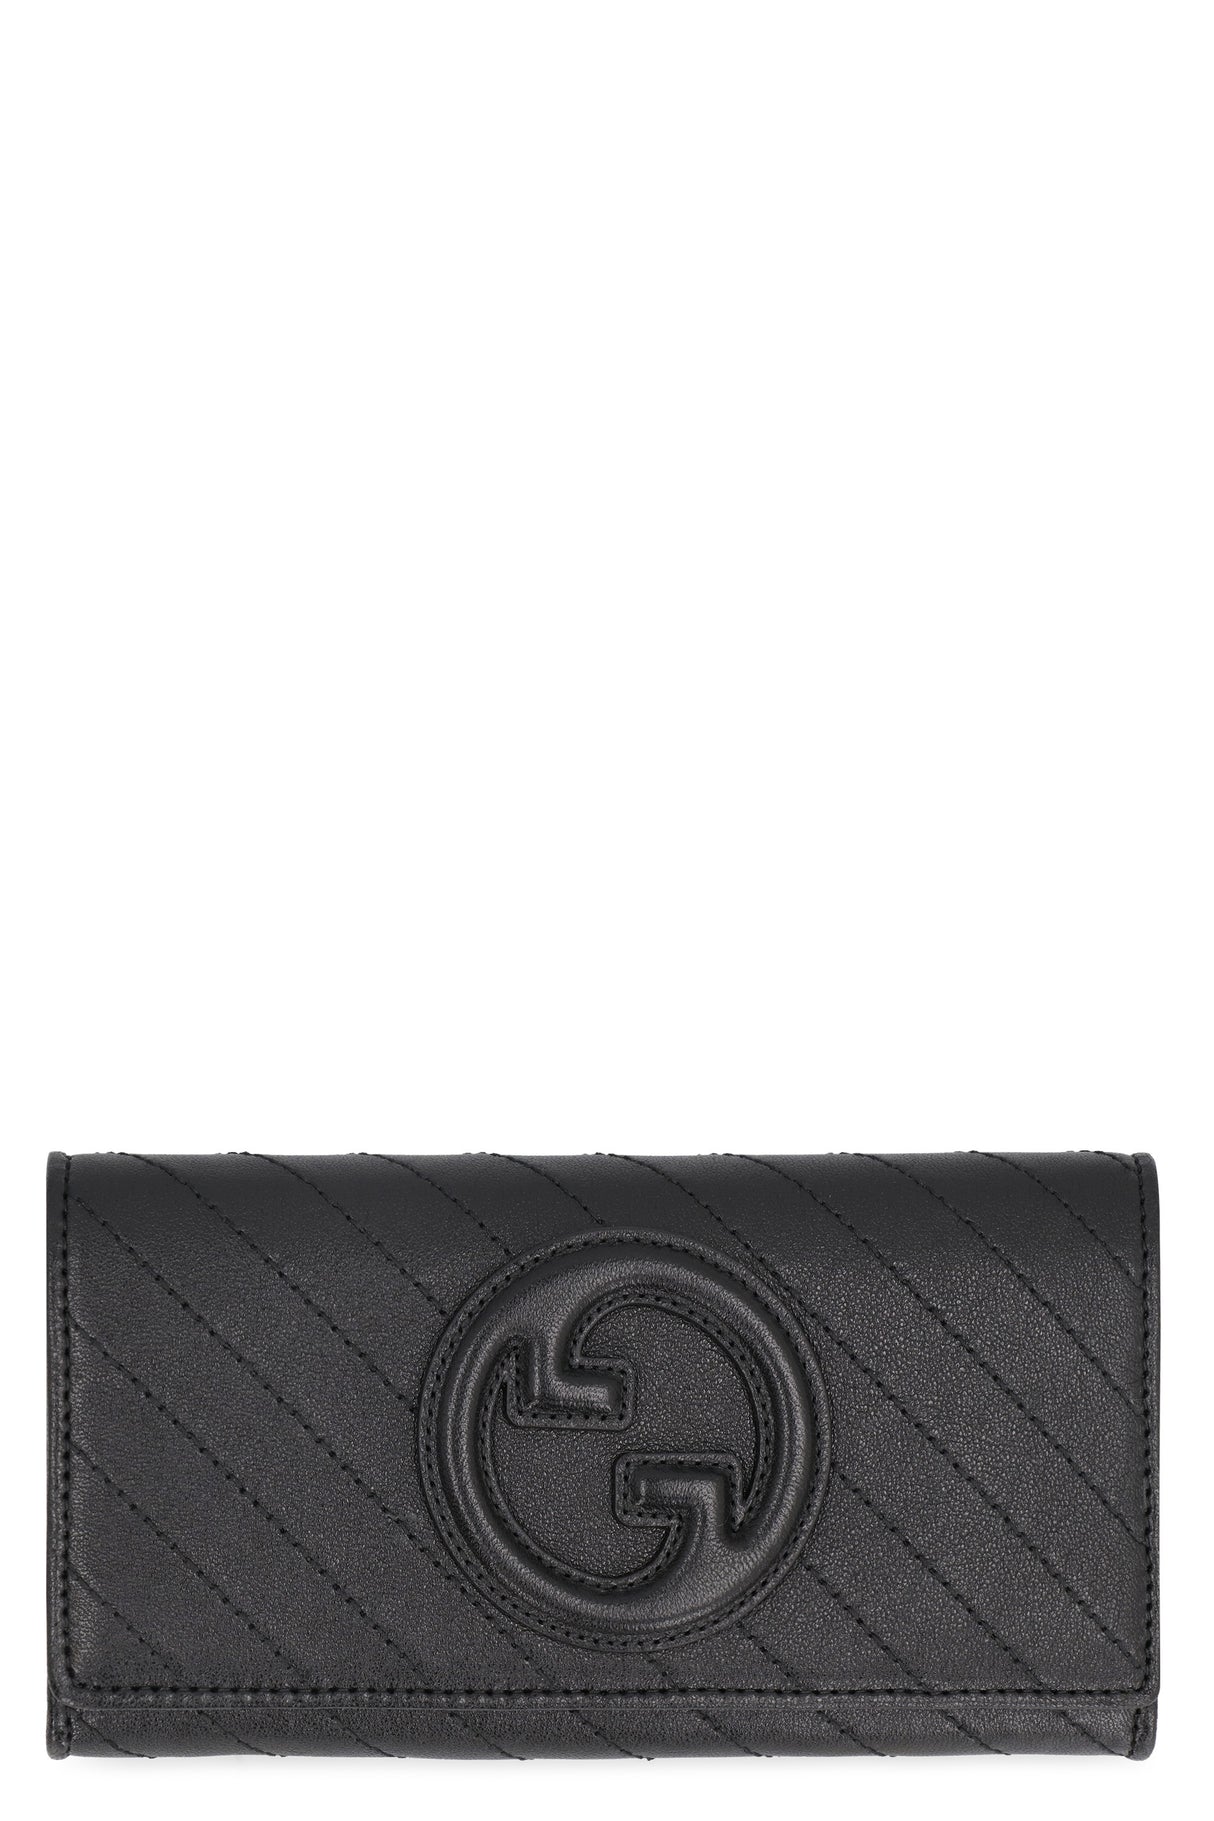 GUCCI Stylish and Functional Black Leather Continental Wallet for Women